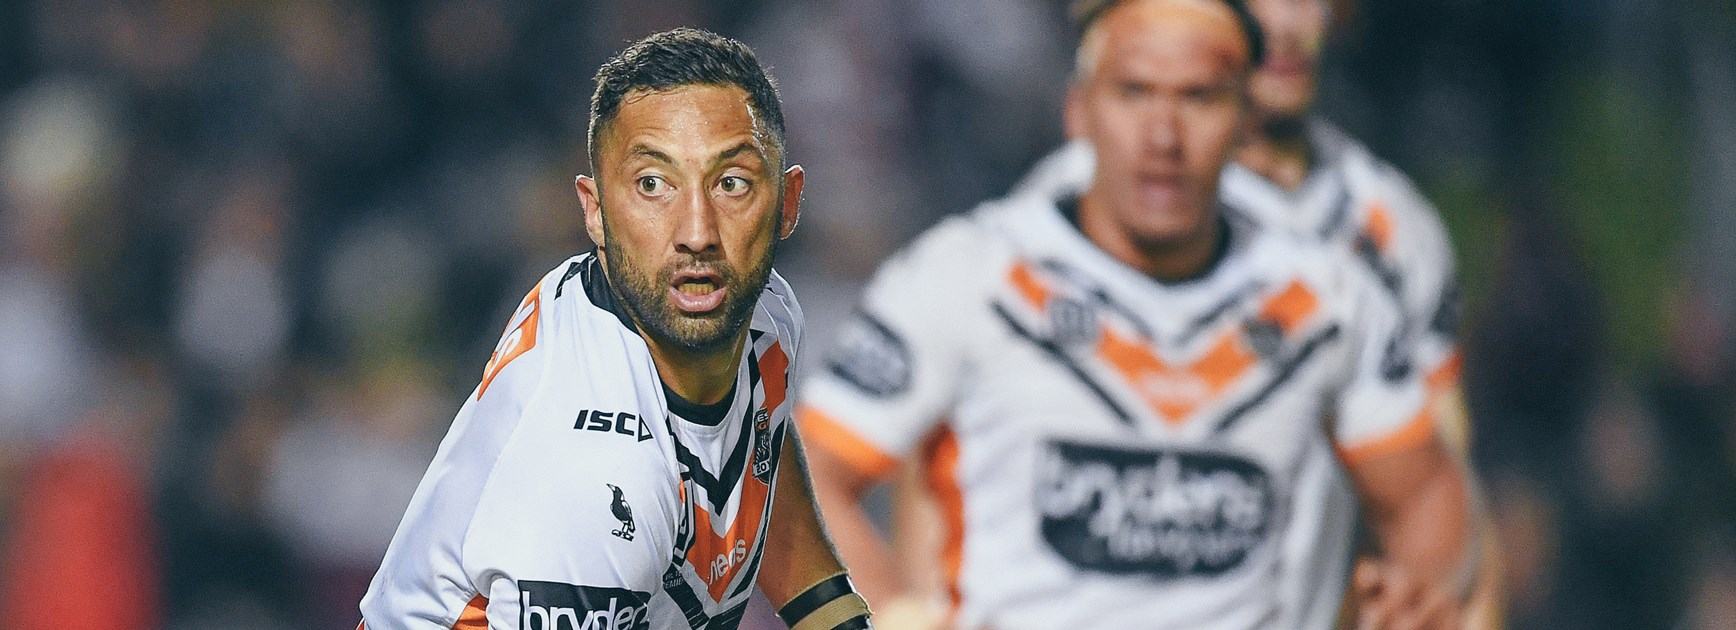 Wests Tigers Results: Round 22